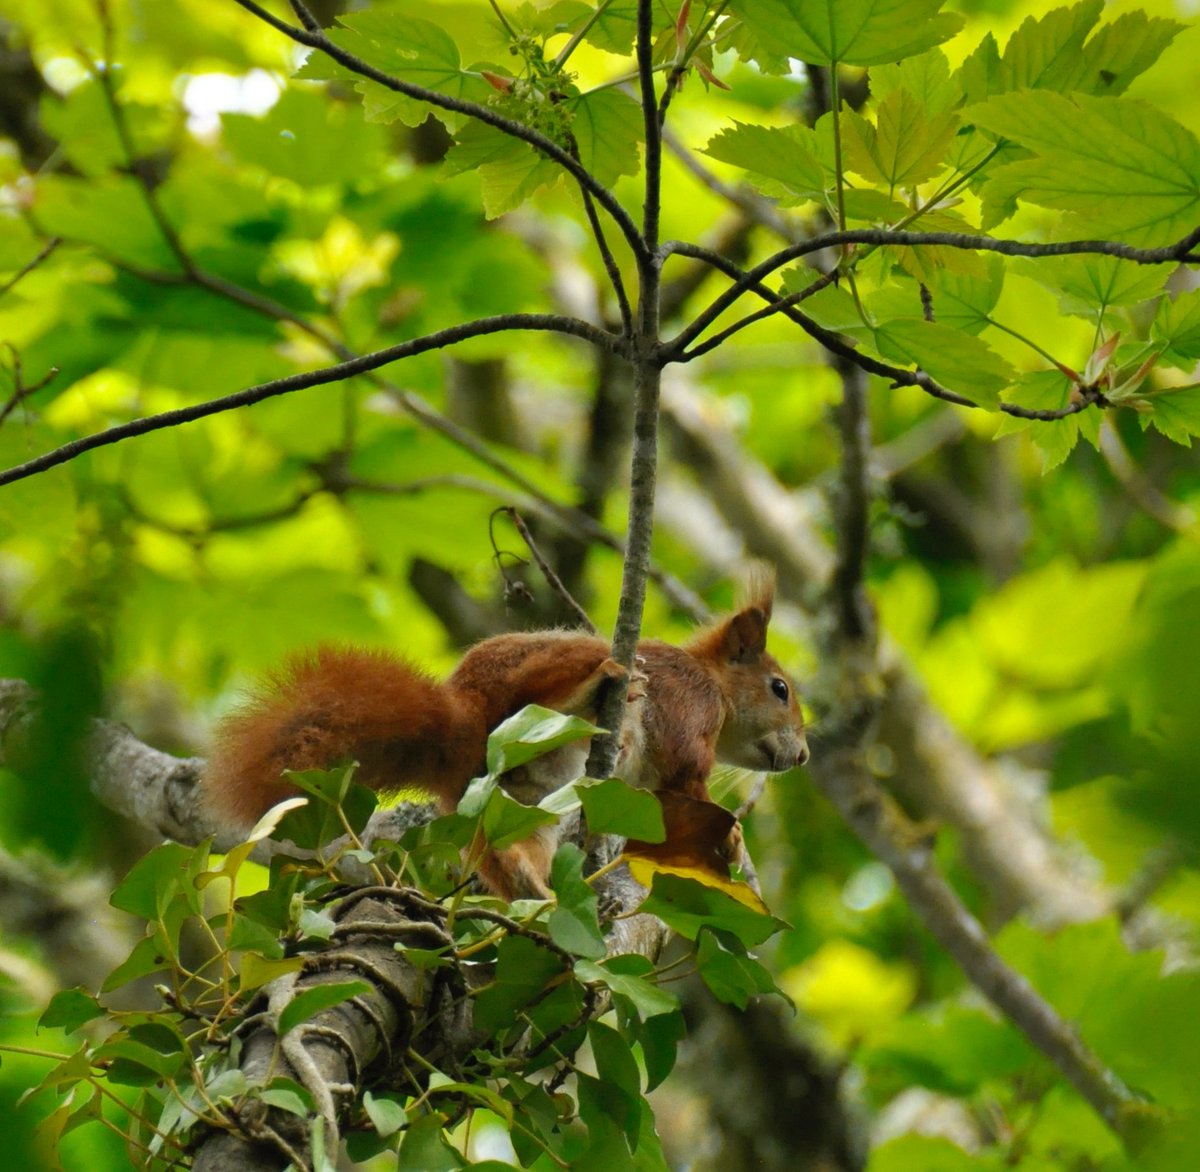 Forgot in my post-poetry fest haze to post this pic of one of @PenrhosSave's famous red squirrels, who obliging appeared for me as I wandered through the trees on Monday afternoon. #Penrhos #Anglesey #RedSquirrels